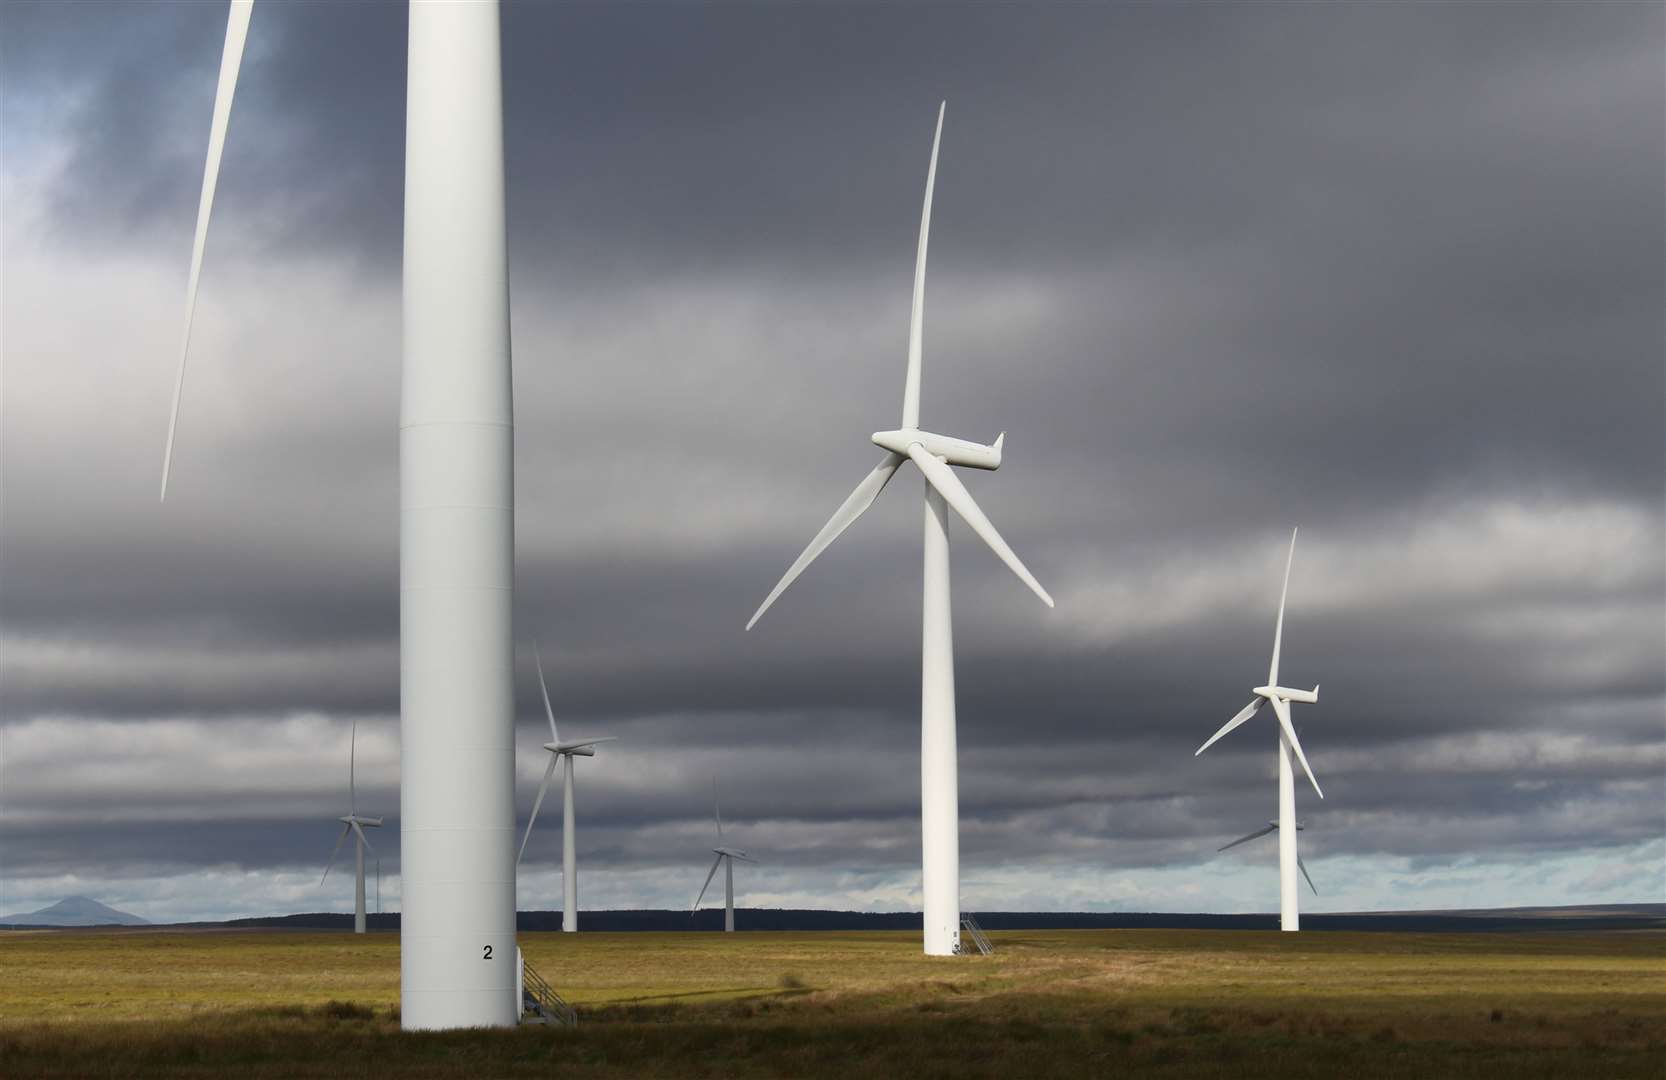 The drive to generate more renewable energy is a thorny topic.